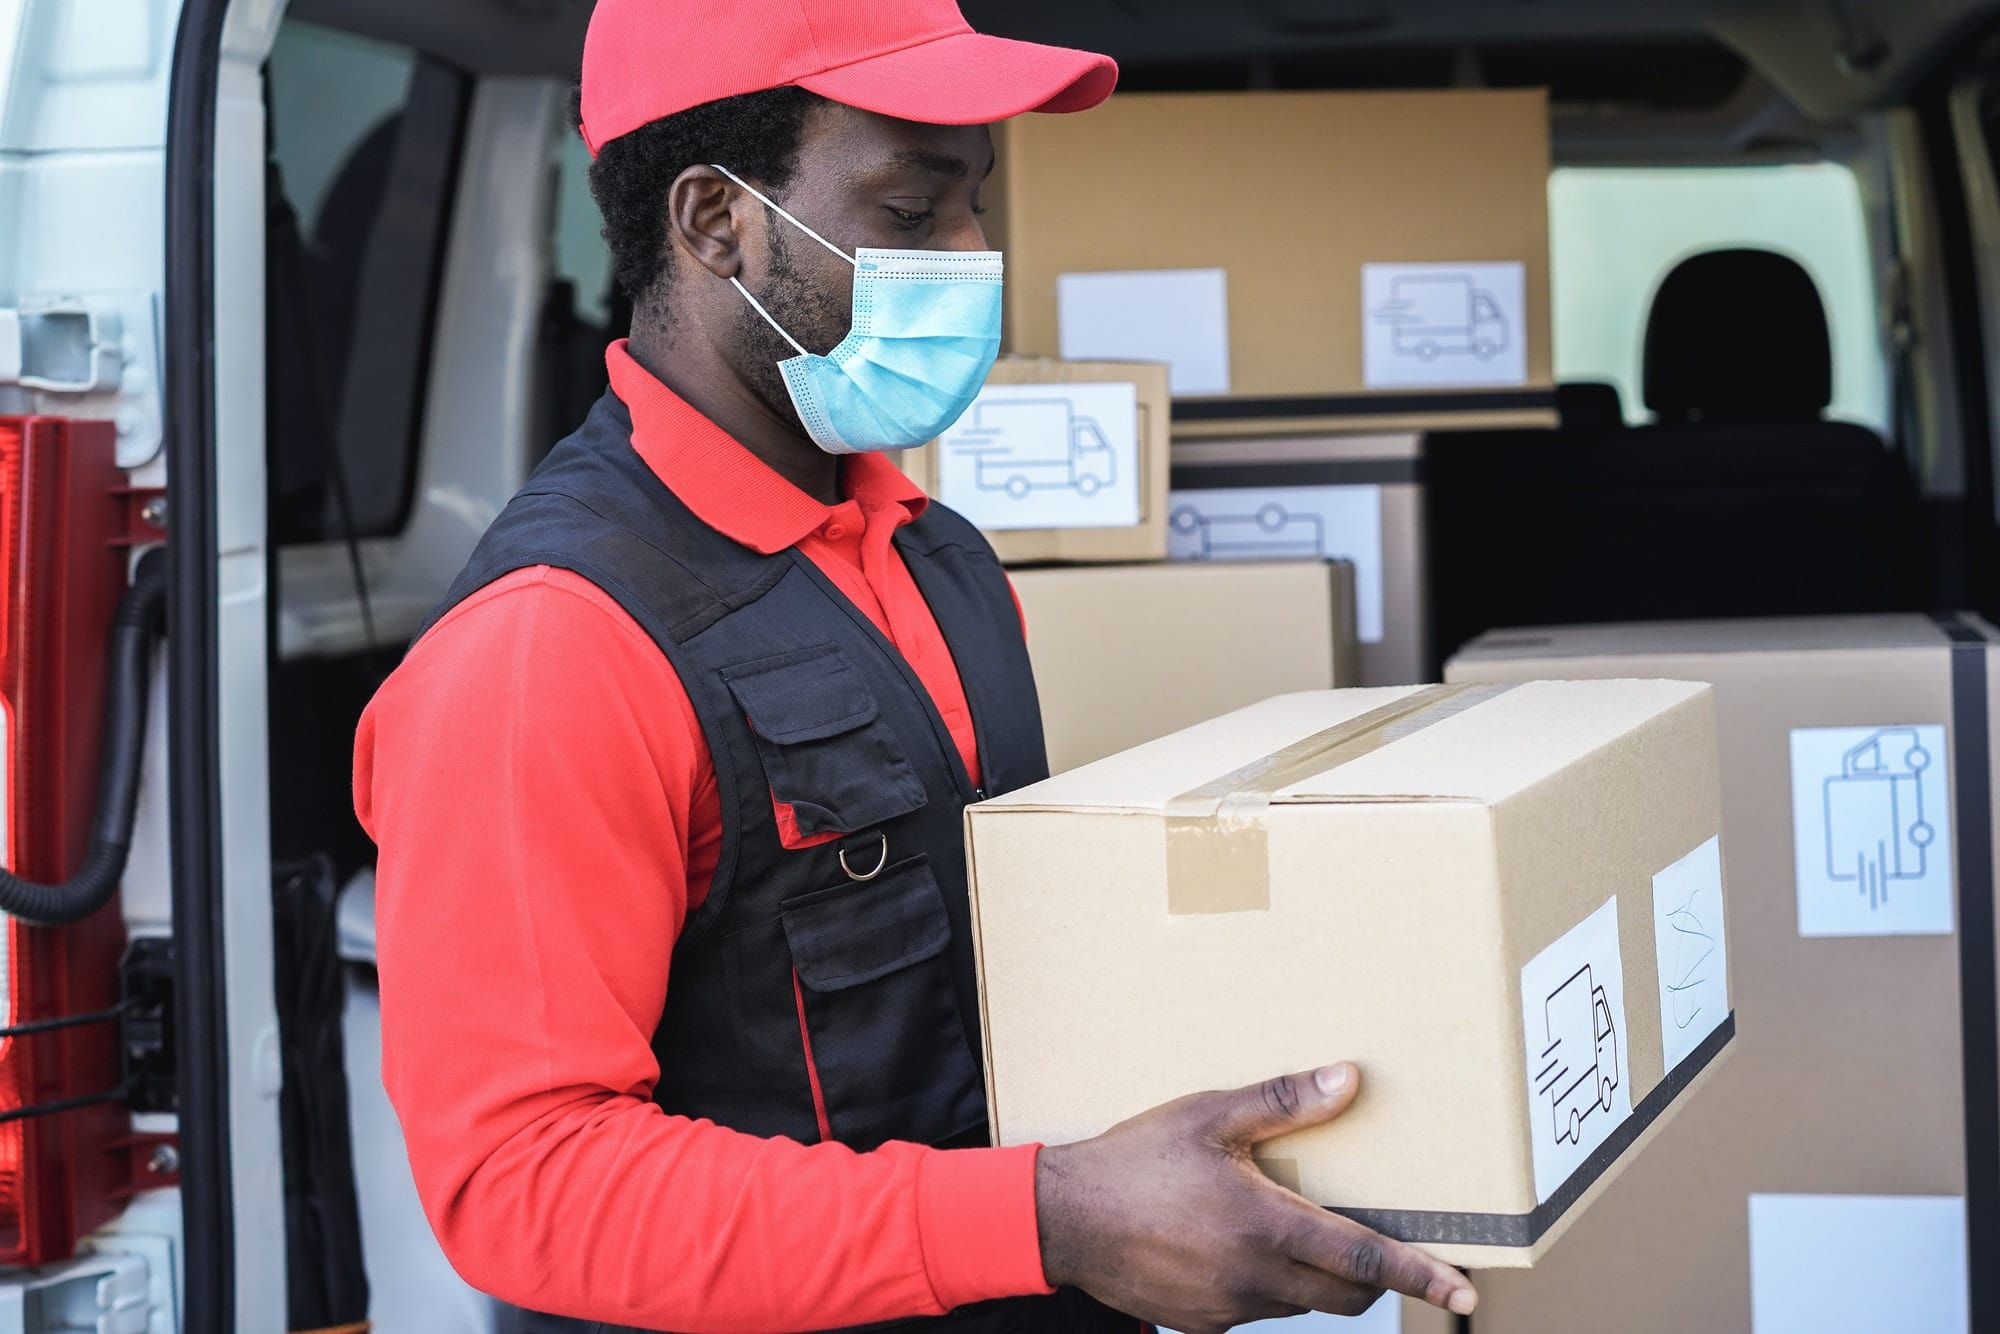 Black delivery man wearing safety mask for coronavirus prevention - Focus on face